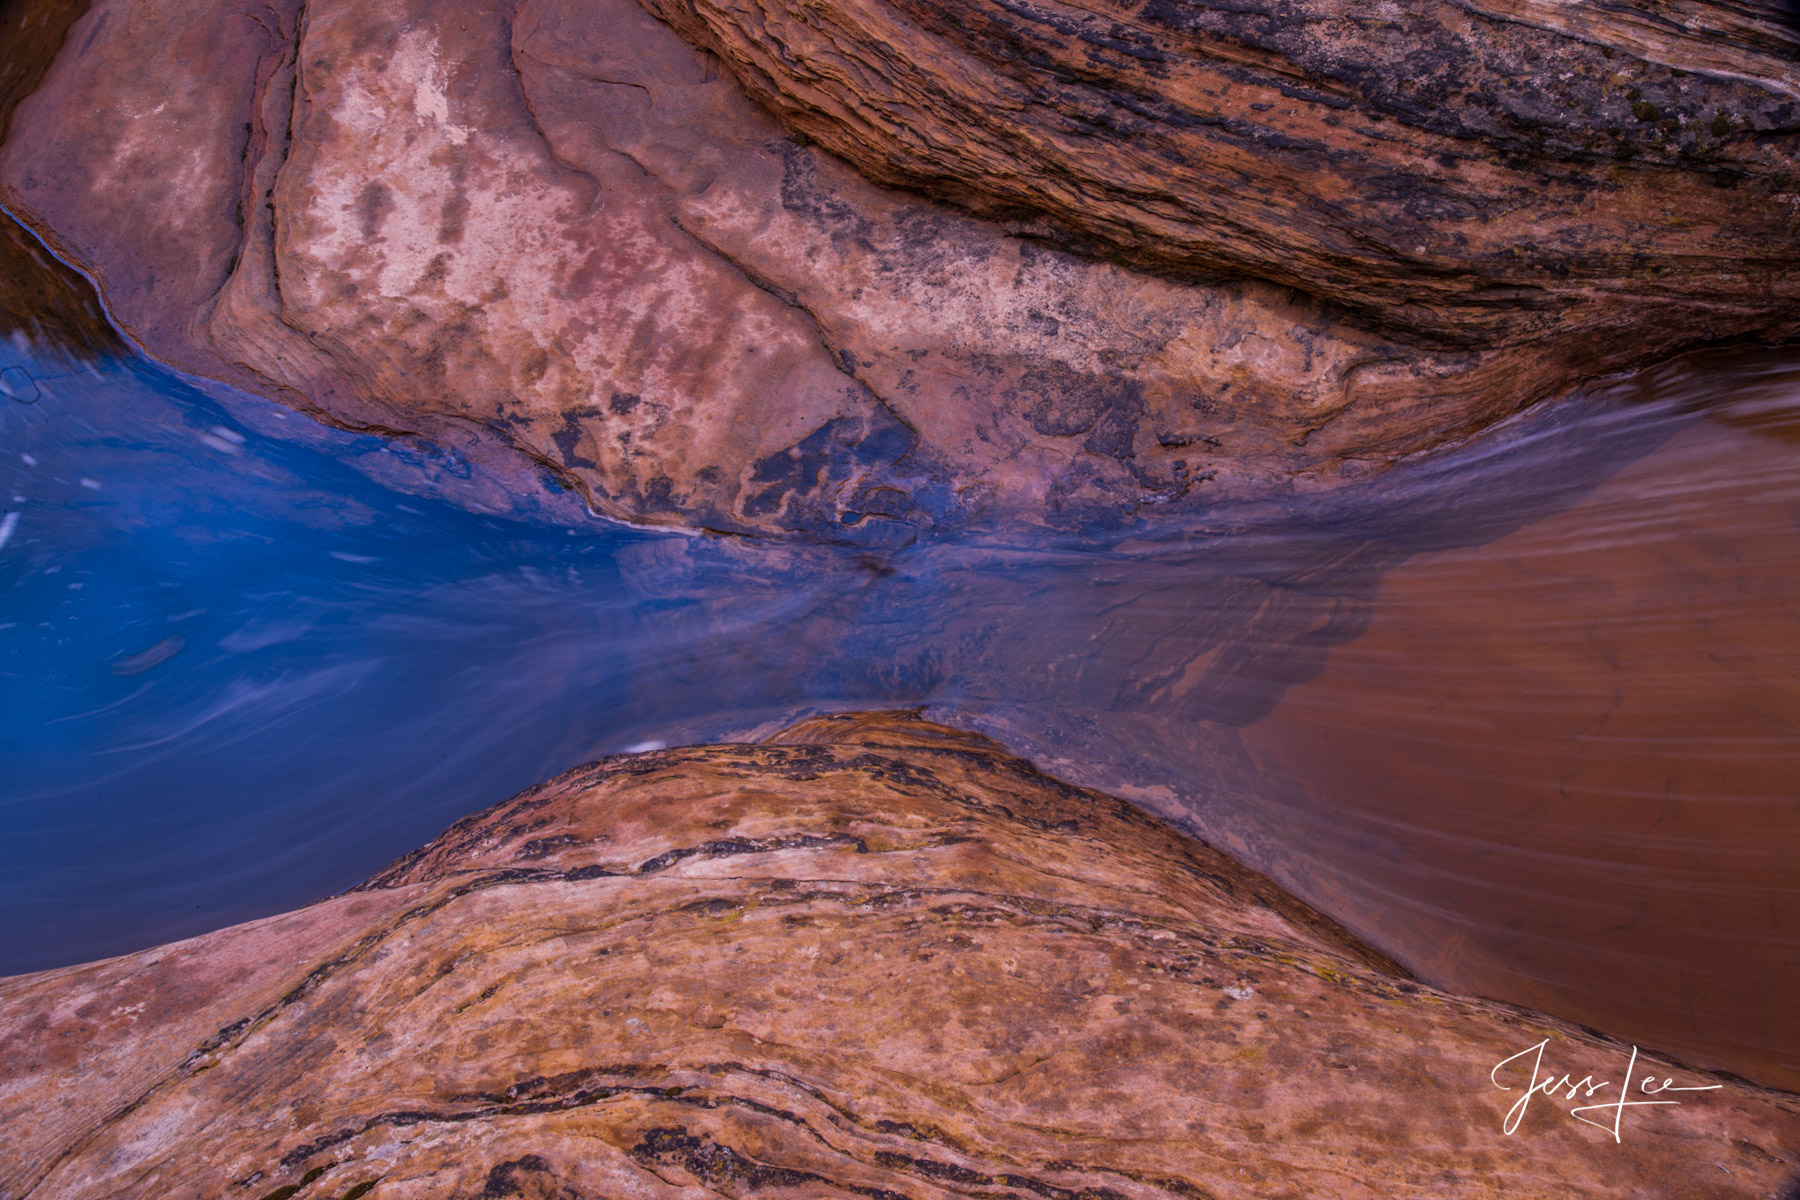 Limited Edition of 50 Exclusive high-resolution Museum Quality Fine Art Prints of Abstract  Zion National Park Photography. Photos...